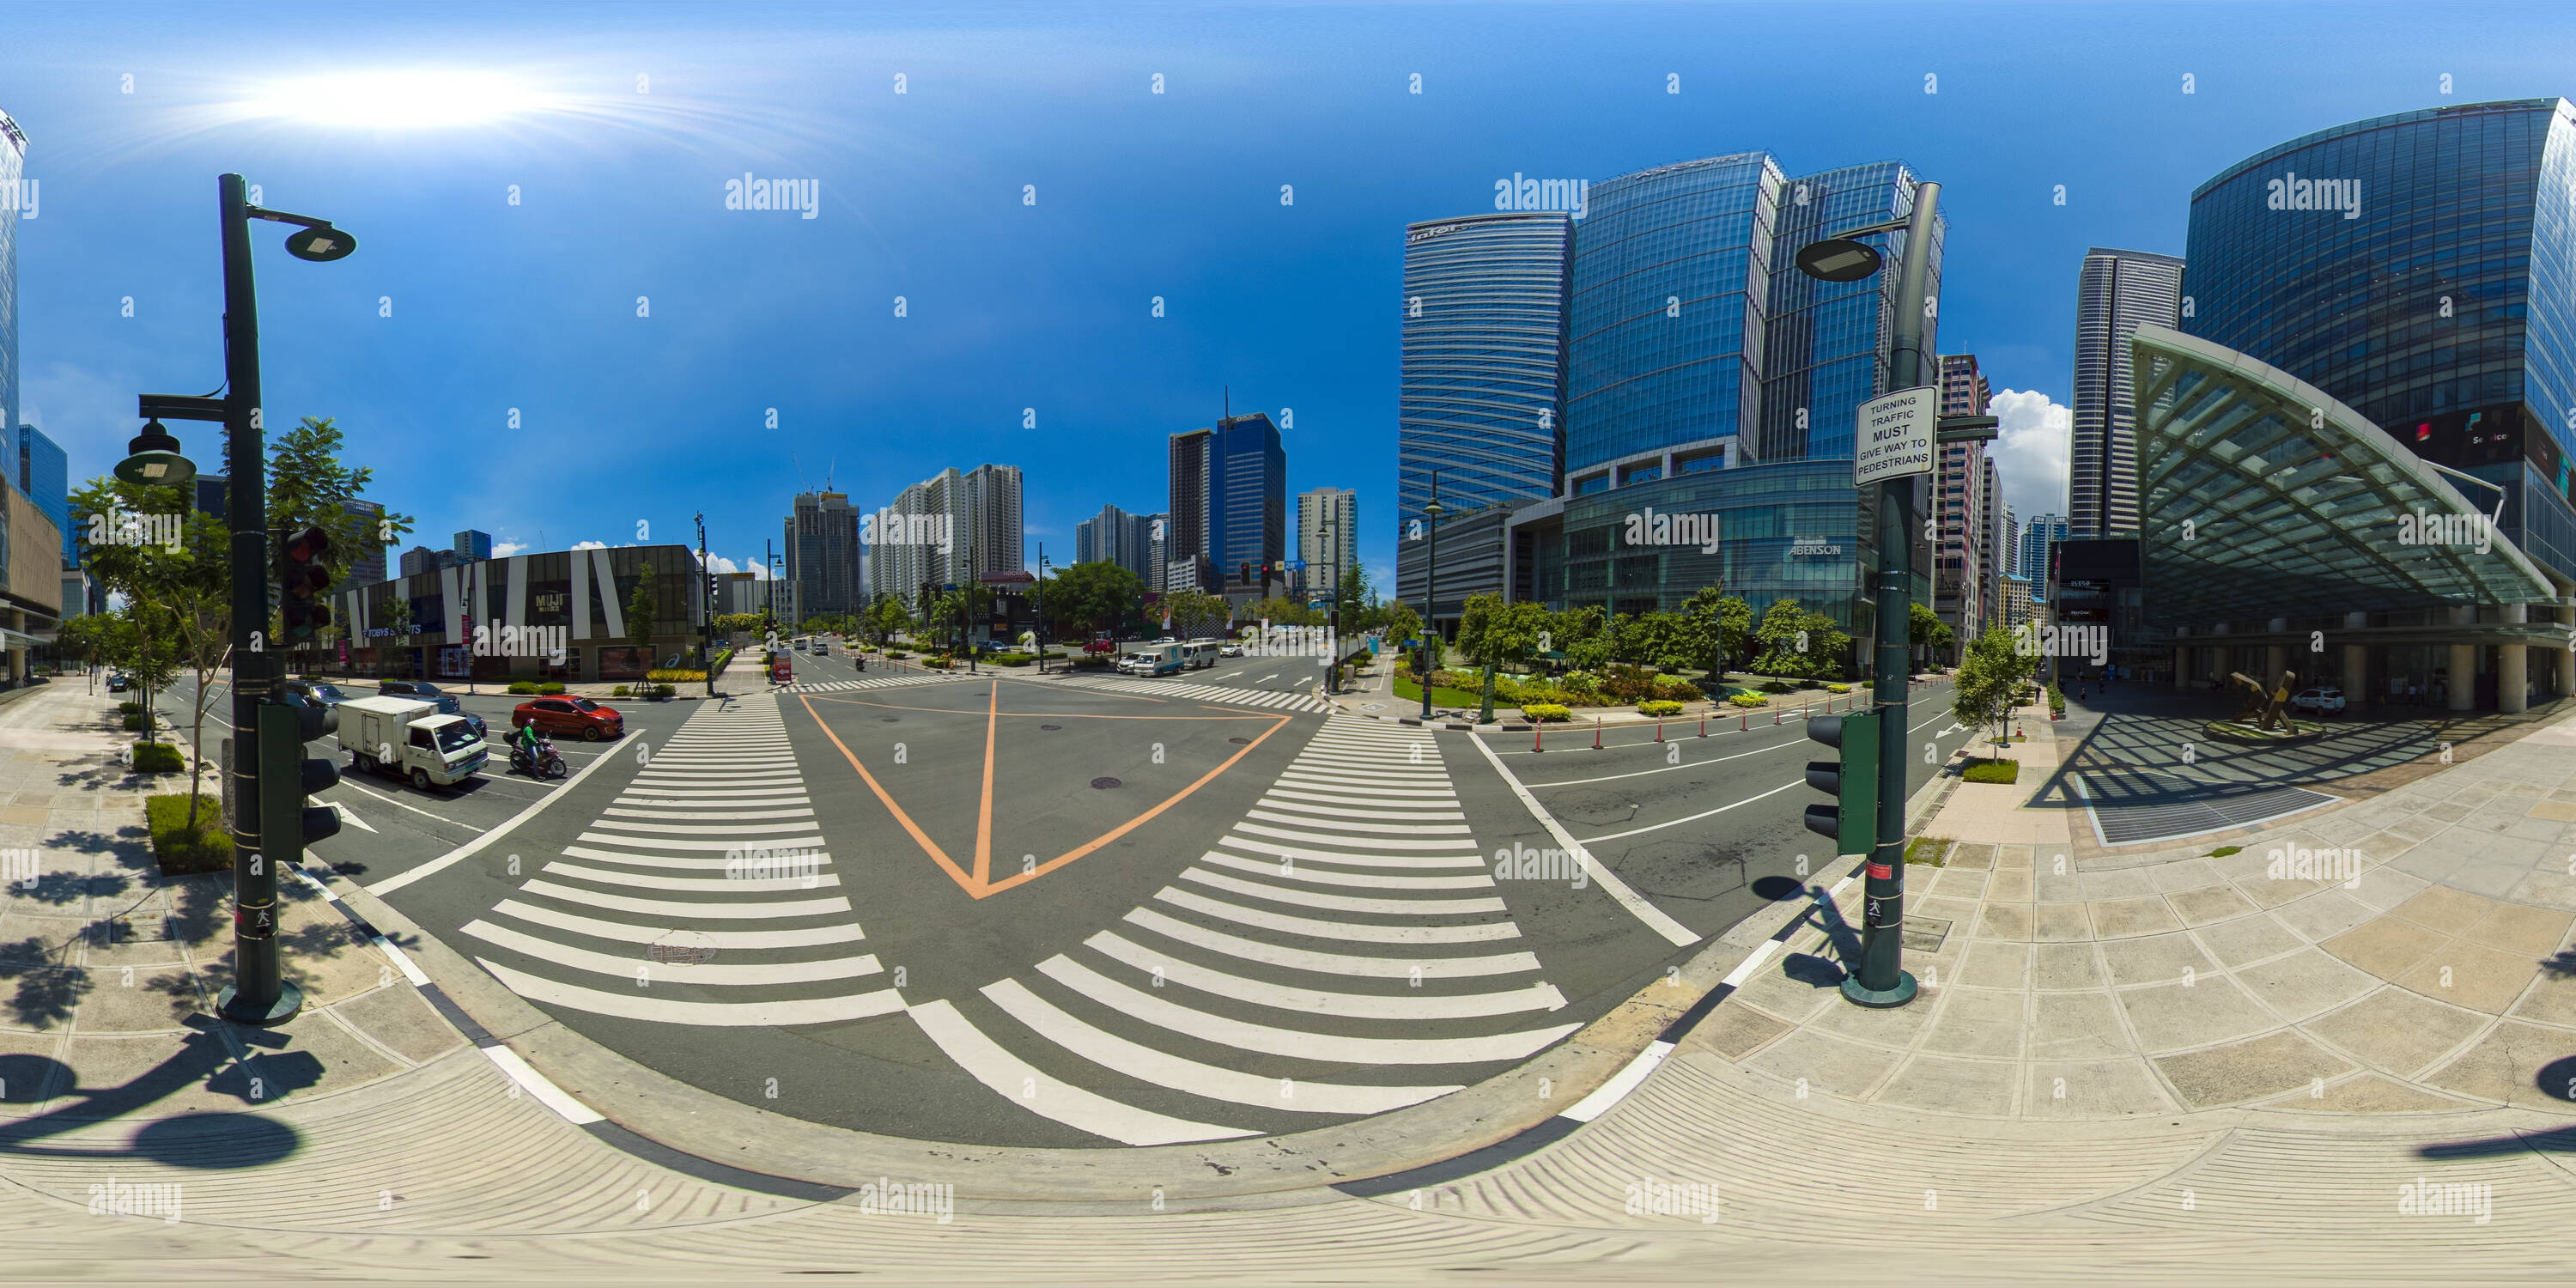 360 degree panoramic view of Manila, the capital of the Philippines with skyscrapers.